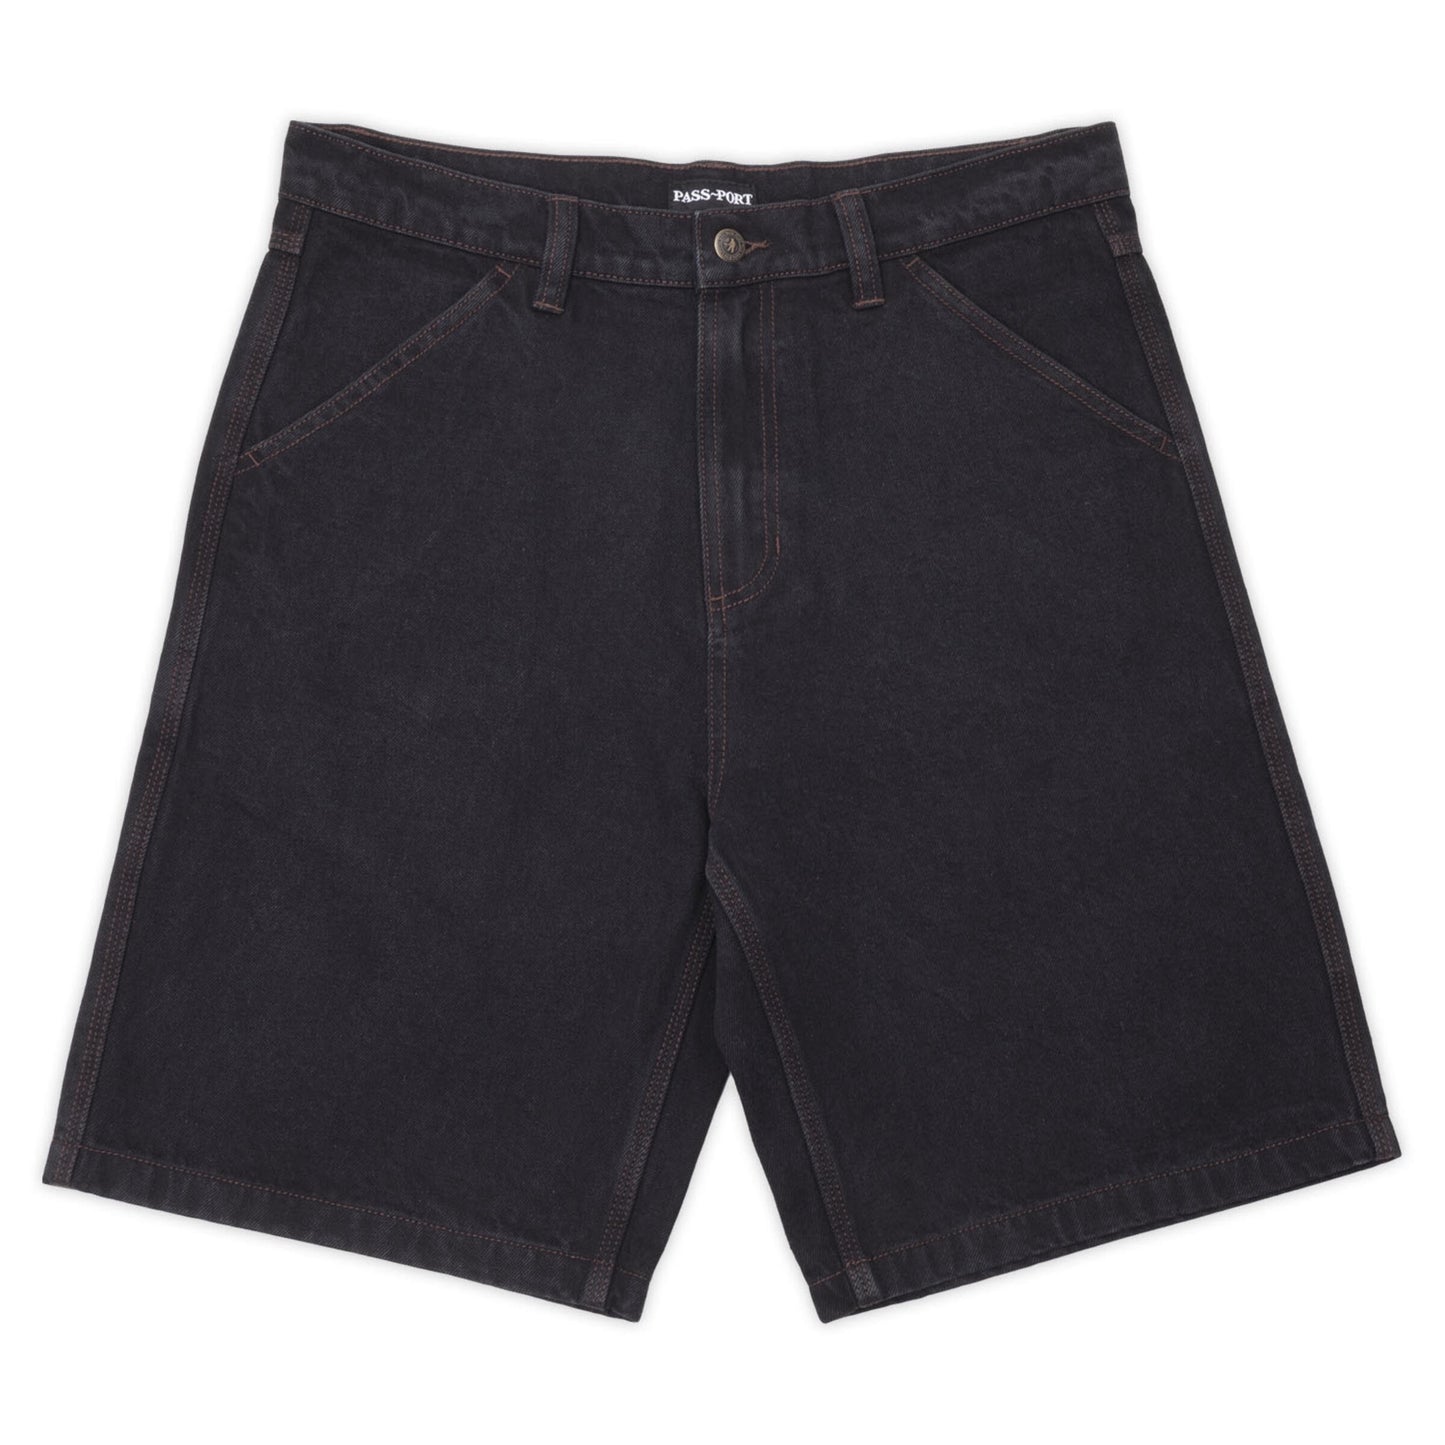 Pass-Port Denim Workers Club Short: Washed Black